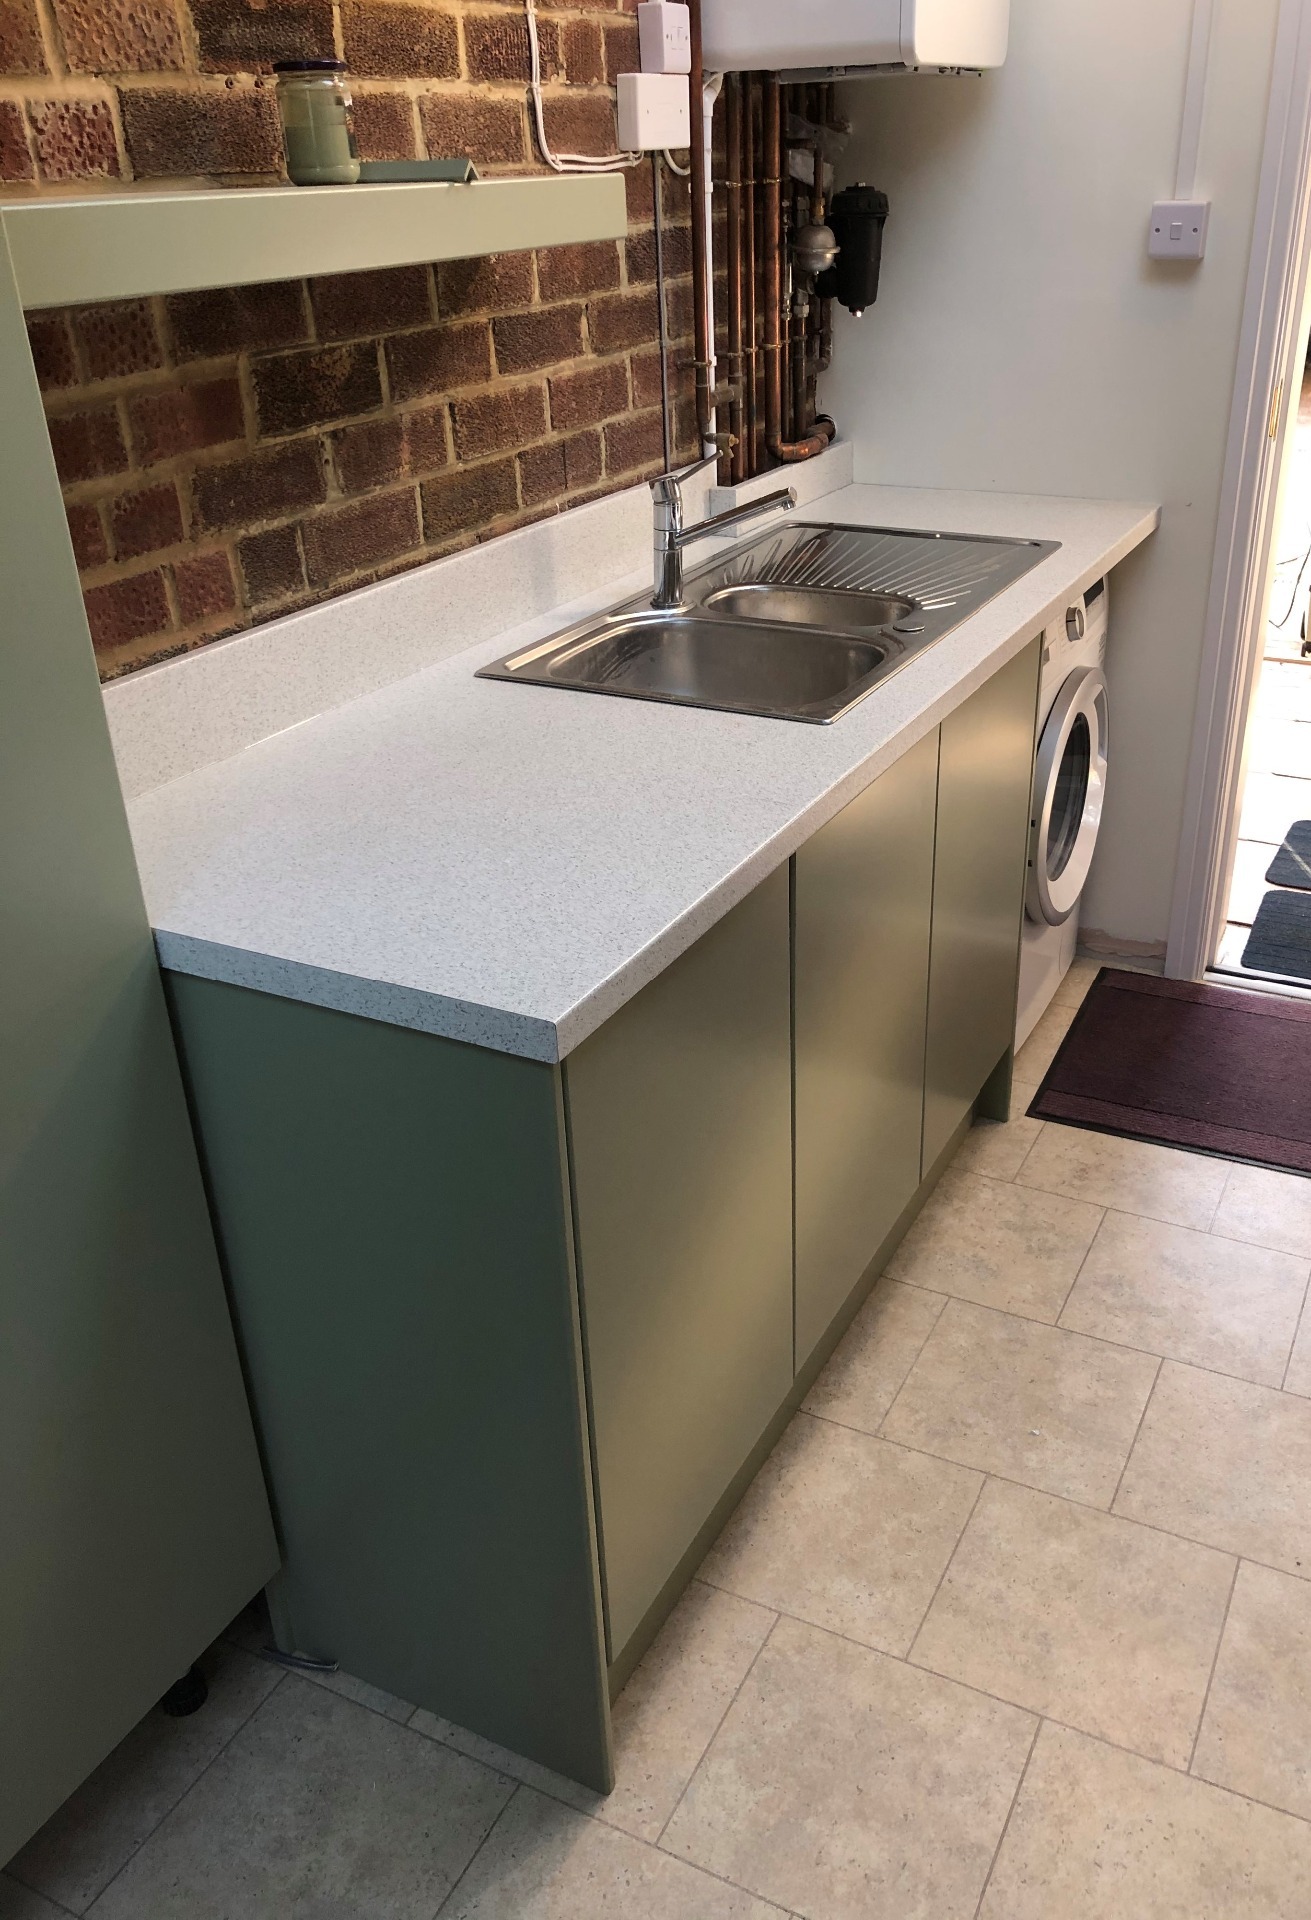 Utility room in garage, Oxfordshire